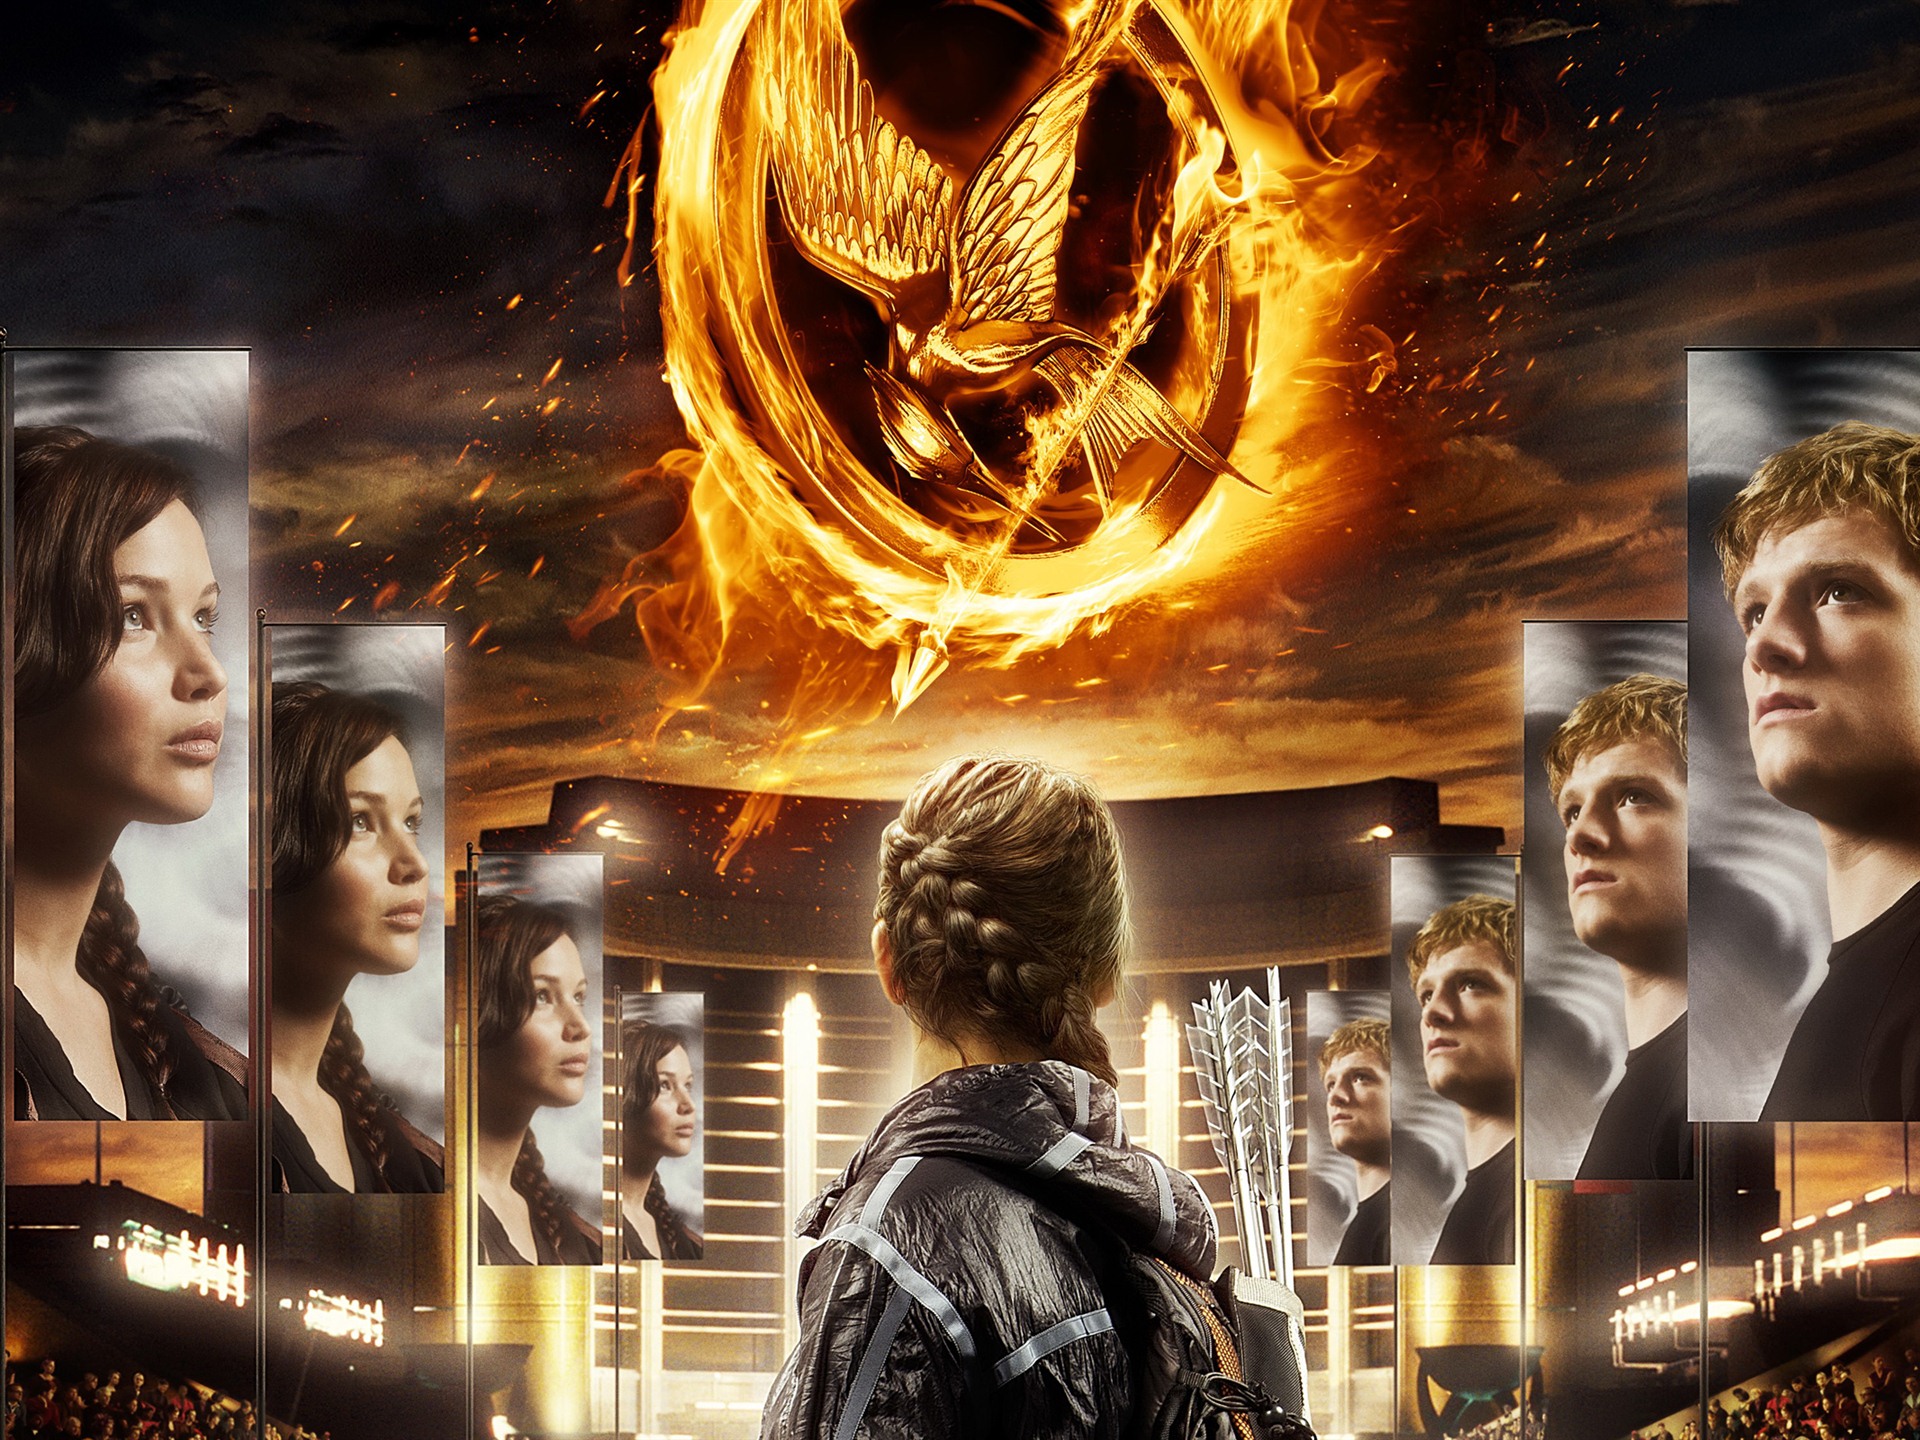 The Hunger Games HD wallpapers #1 - 1920x1440